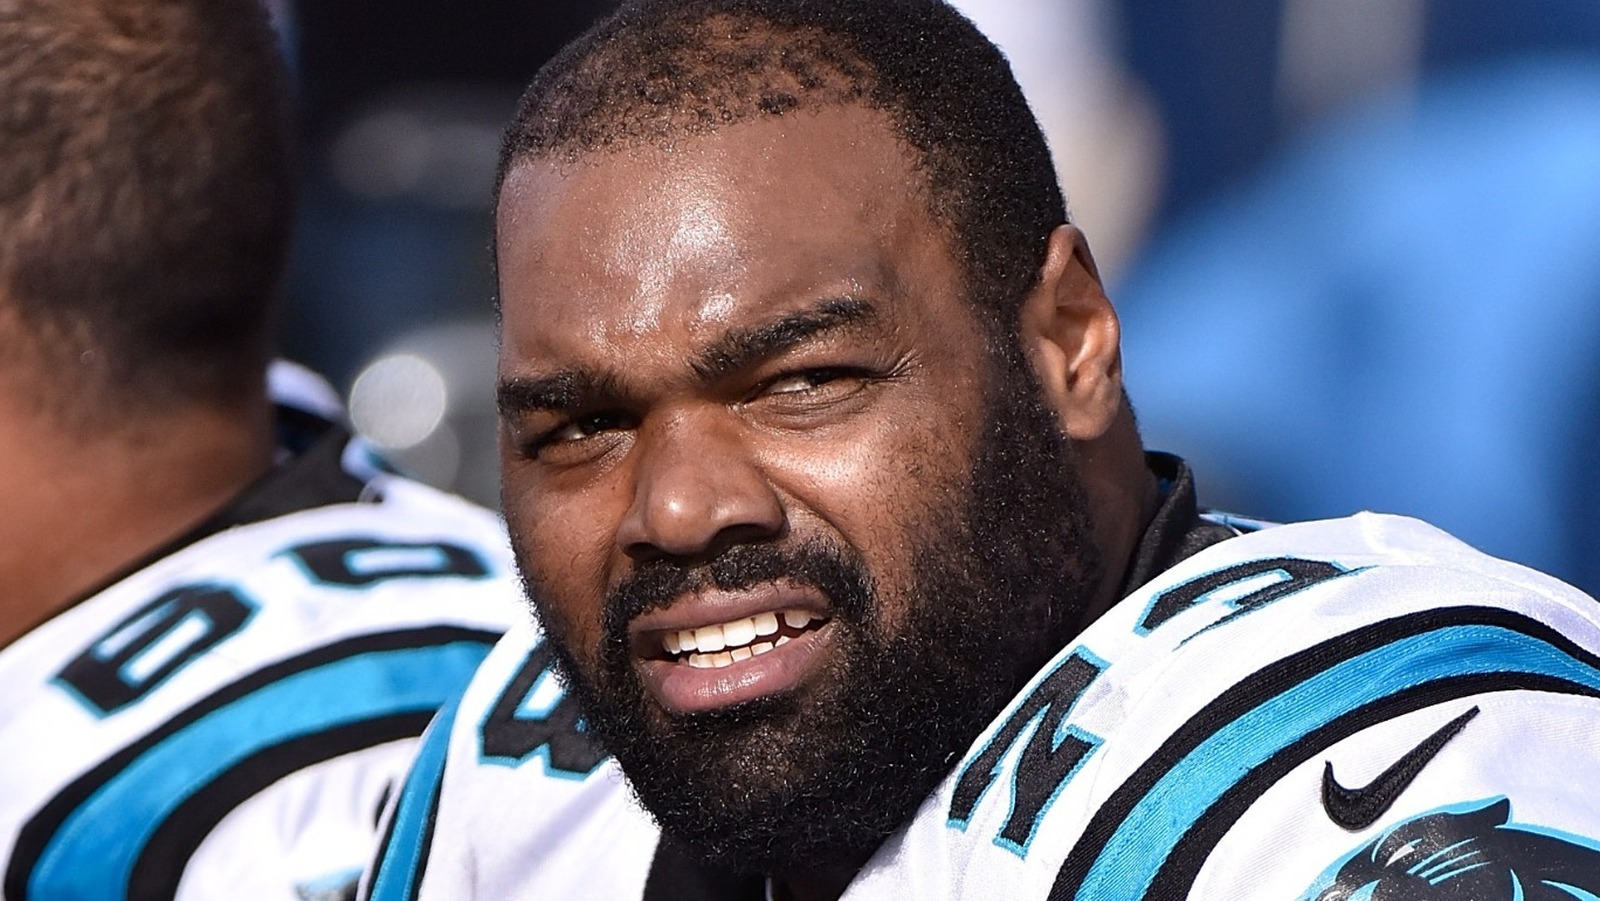 Michael Oher Net Worth 2022: How much did Michael Oher Make in the NFL?